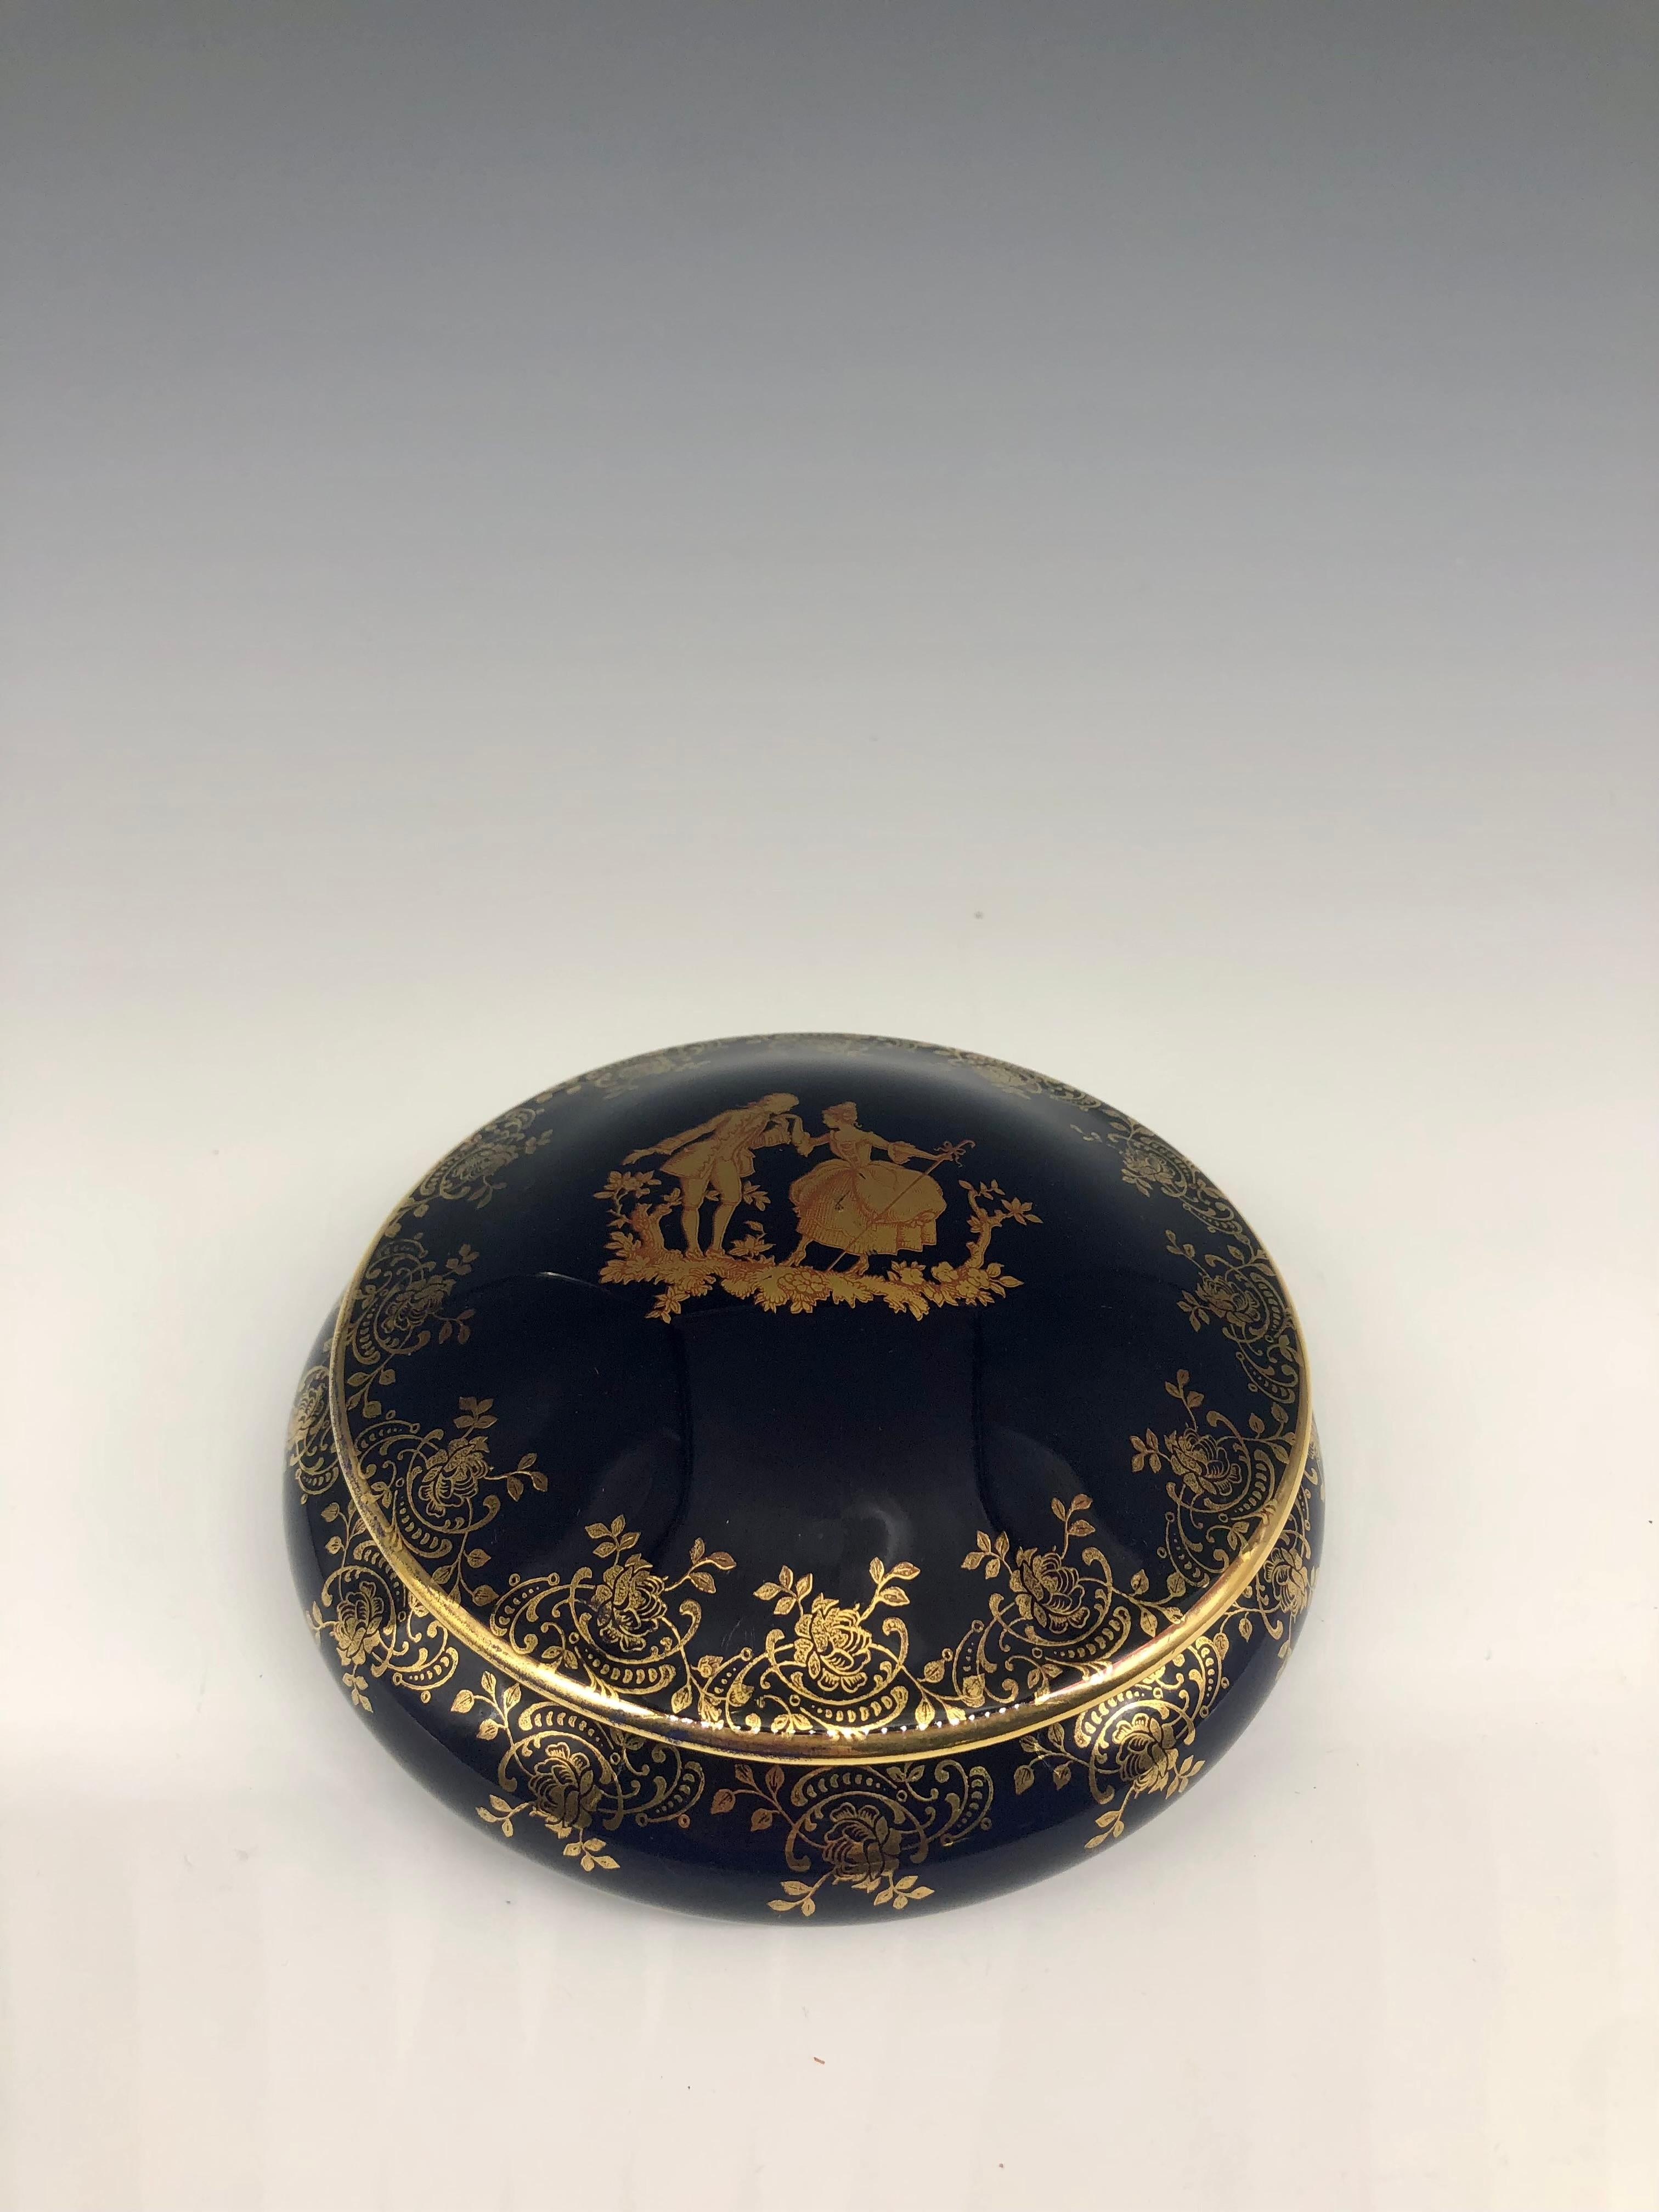 Beautiful vintage cobalt blue lidded porcelain trinket jewelry box with gold hand-painted floral decorative rim. The central illustration is of a couple dressed in Louis XVI period style dress, with the male kissing the hand of a woman curtsying and